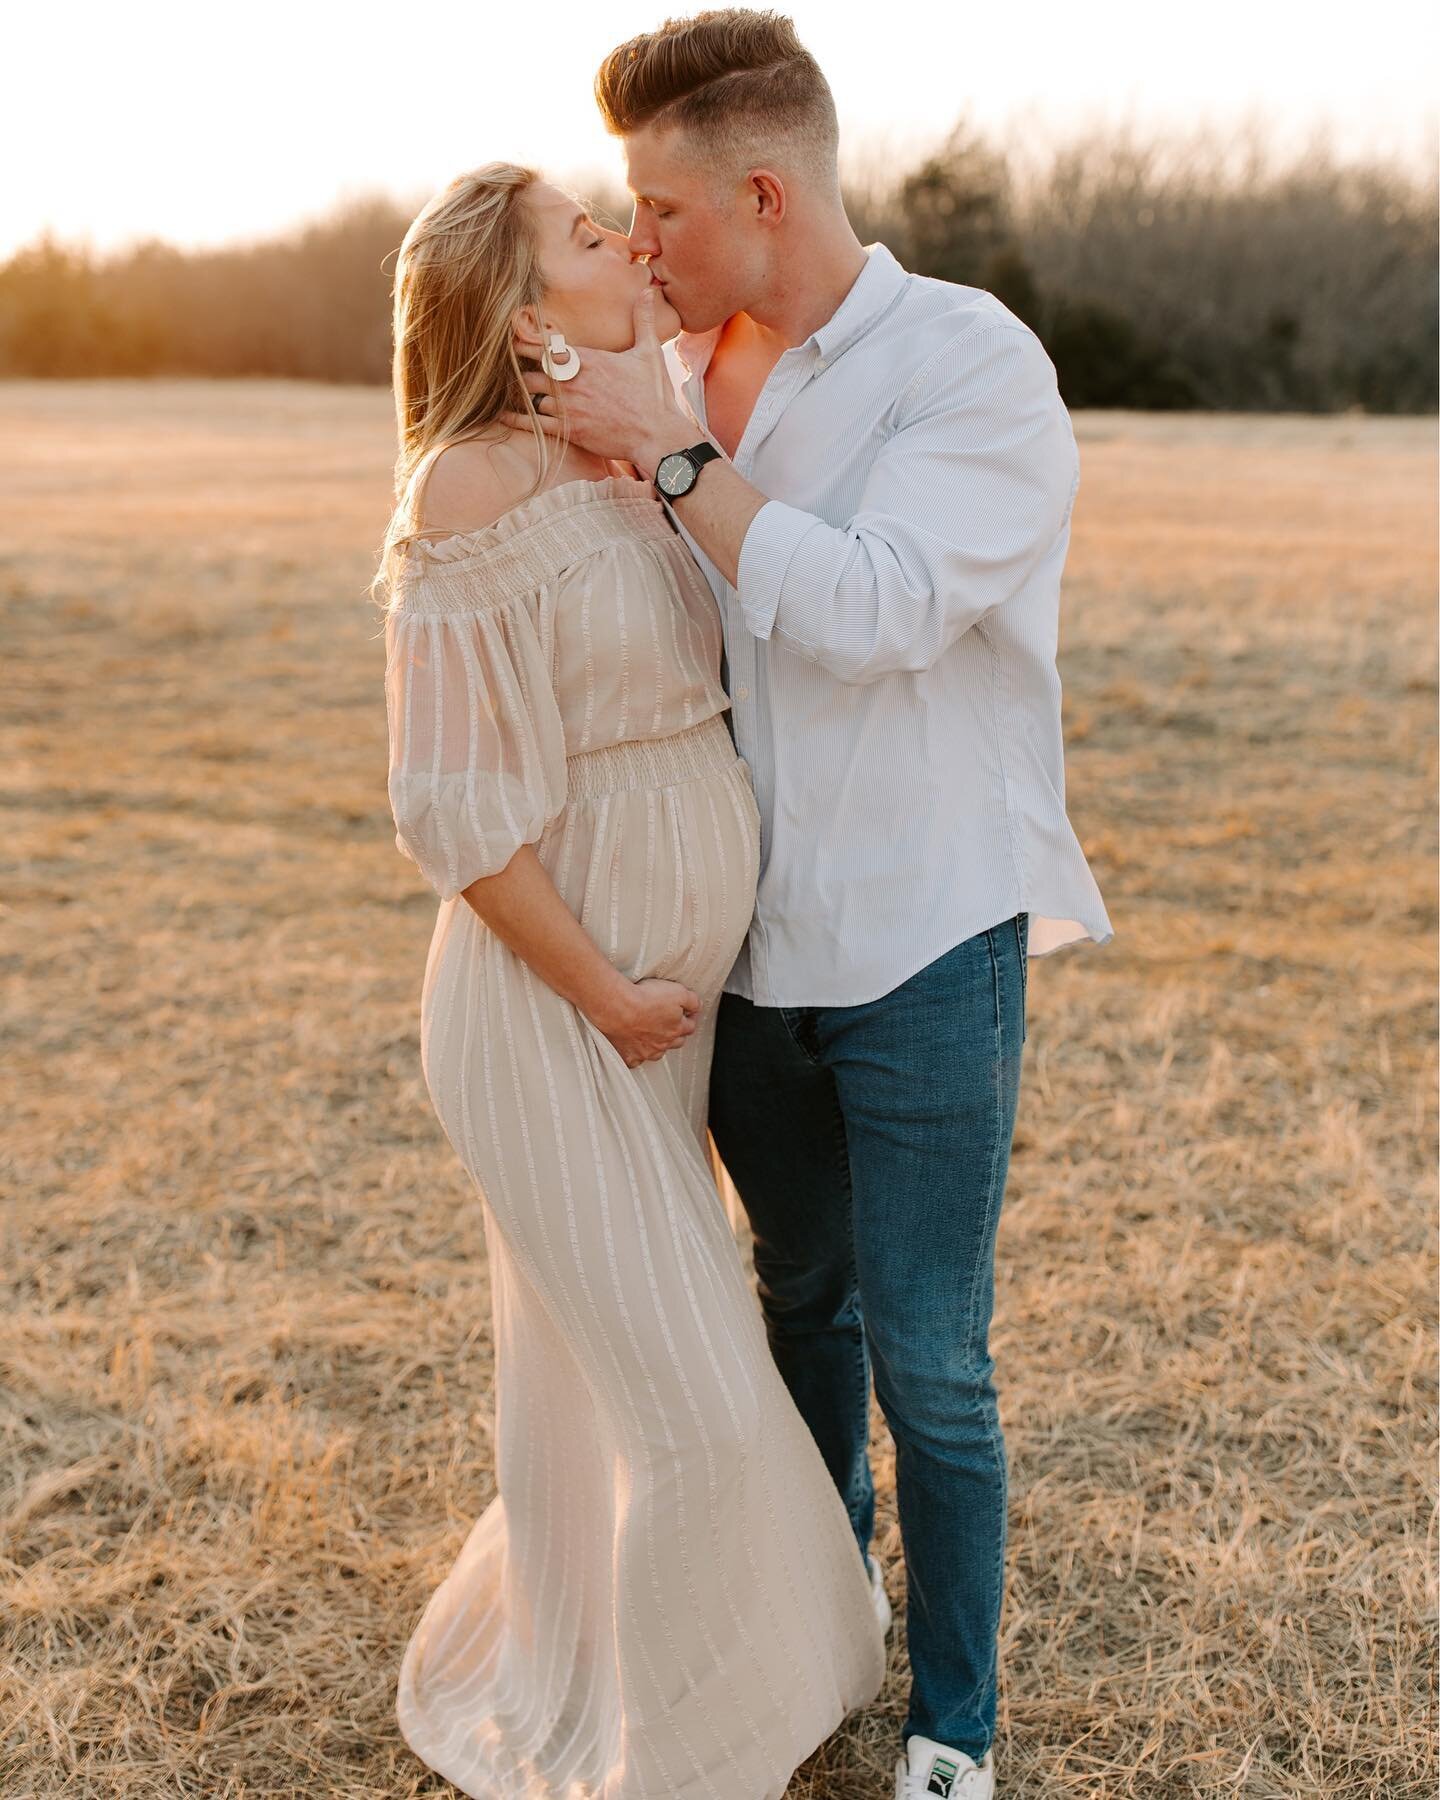 I finally took a few minutes to edit a few of my maternity pics 🥹
⁠
Hopefully around 1 week until we move, about 2.5 weeks until our due date, about 3 weeks until we induce (if our sweet boy doesn't come earlier)! Life is crazy, but SO SO GOOD!! ⁠
⁠